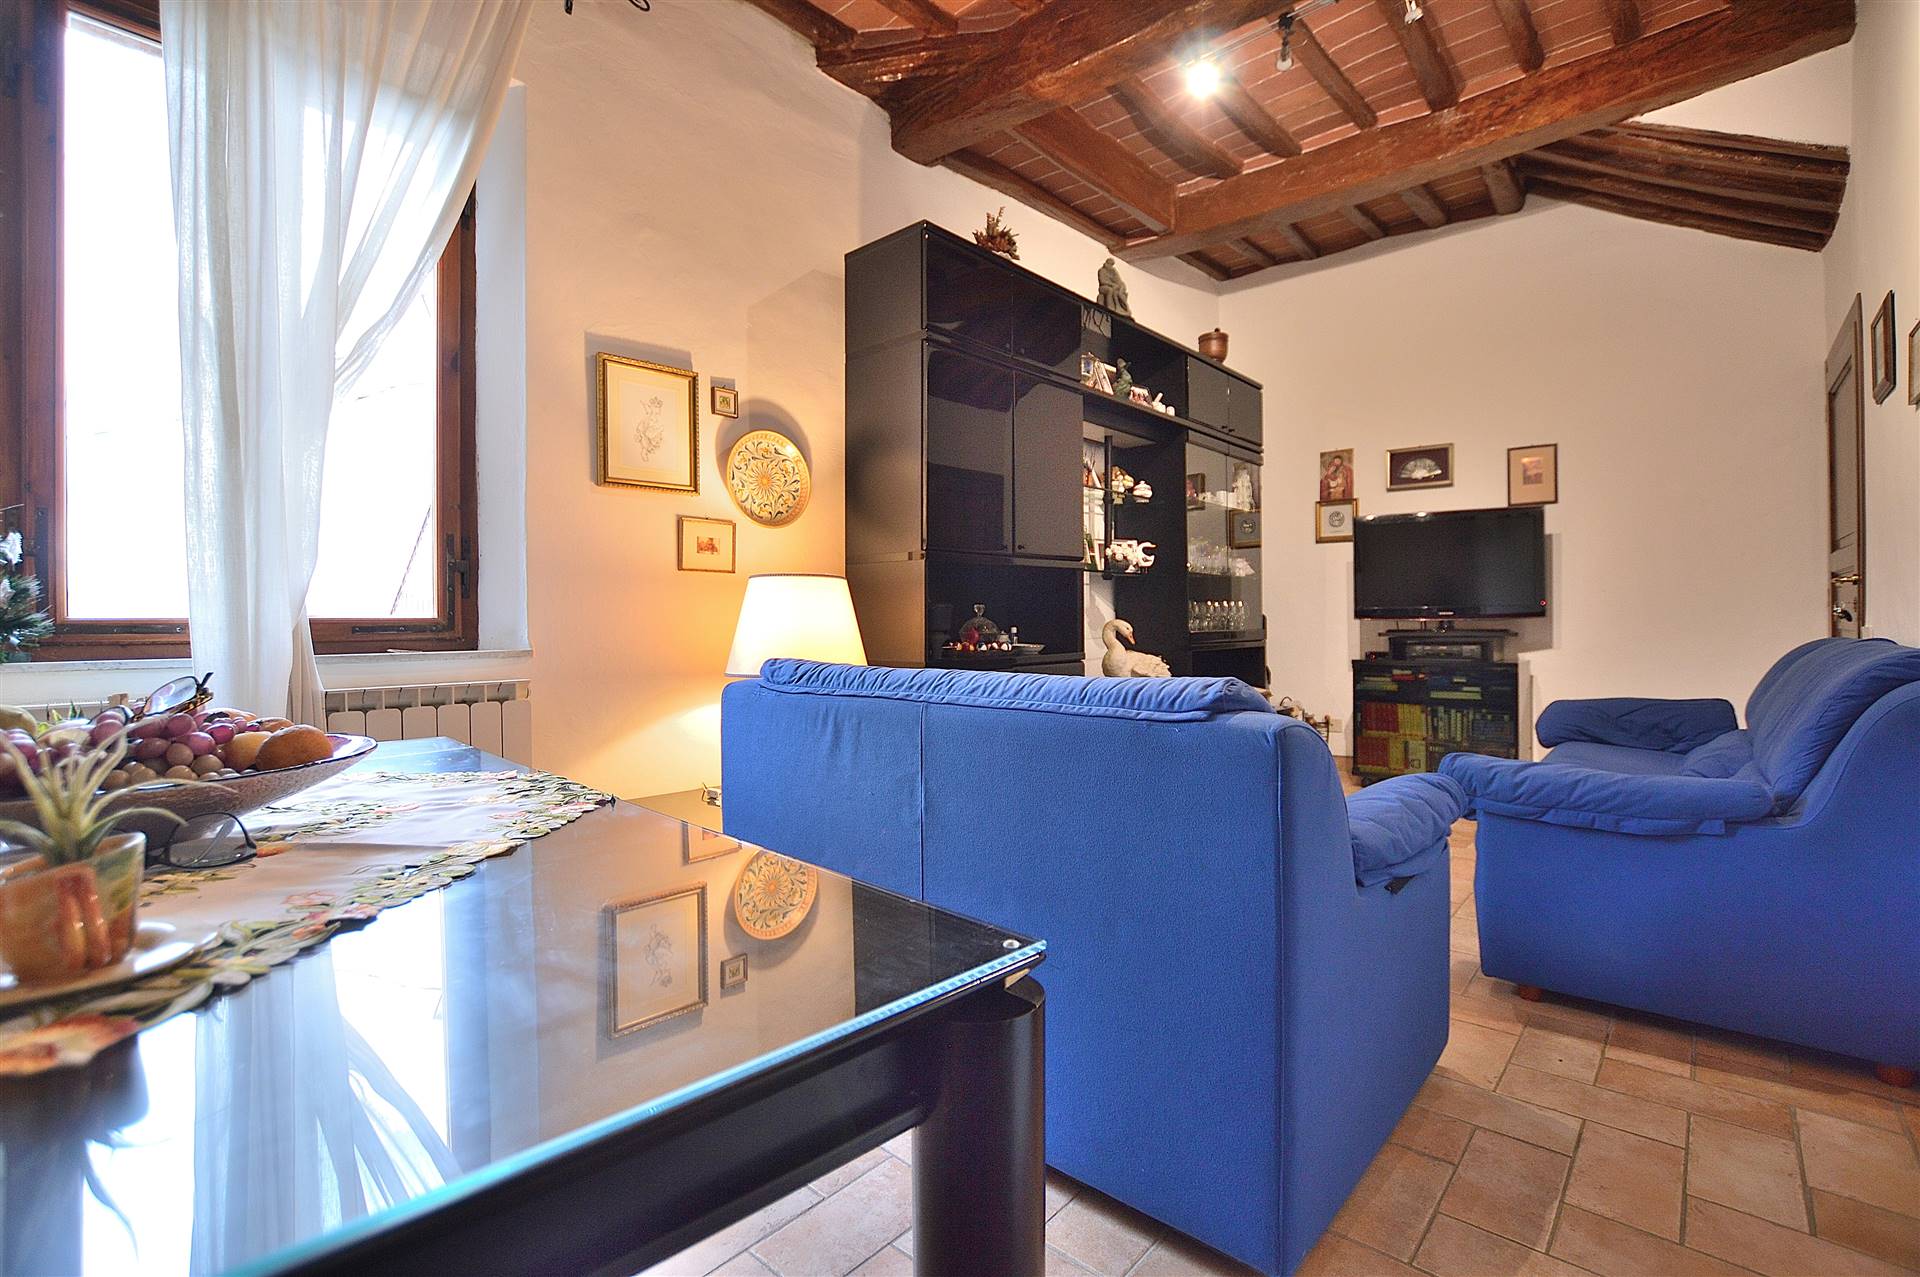 LUCIGNANO D'ARBIA, MONTERONI D'ARBIA, Apartment for sale of 116 Sq. mt., Excellent Condition, Heating Individual heating system, Energetic class: G, Epi: 175 kwh/m2 year, placed at 1° on 2, composed 